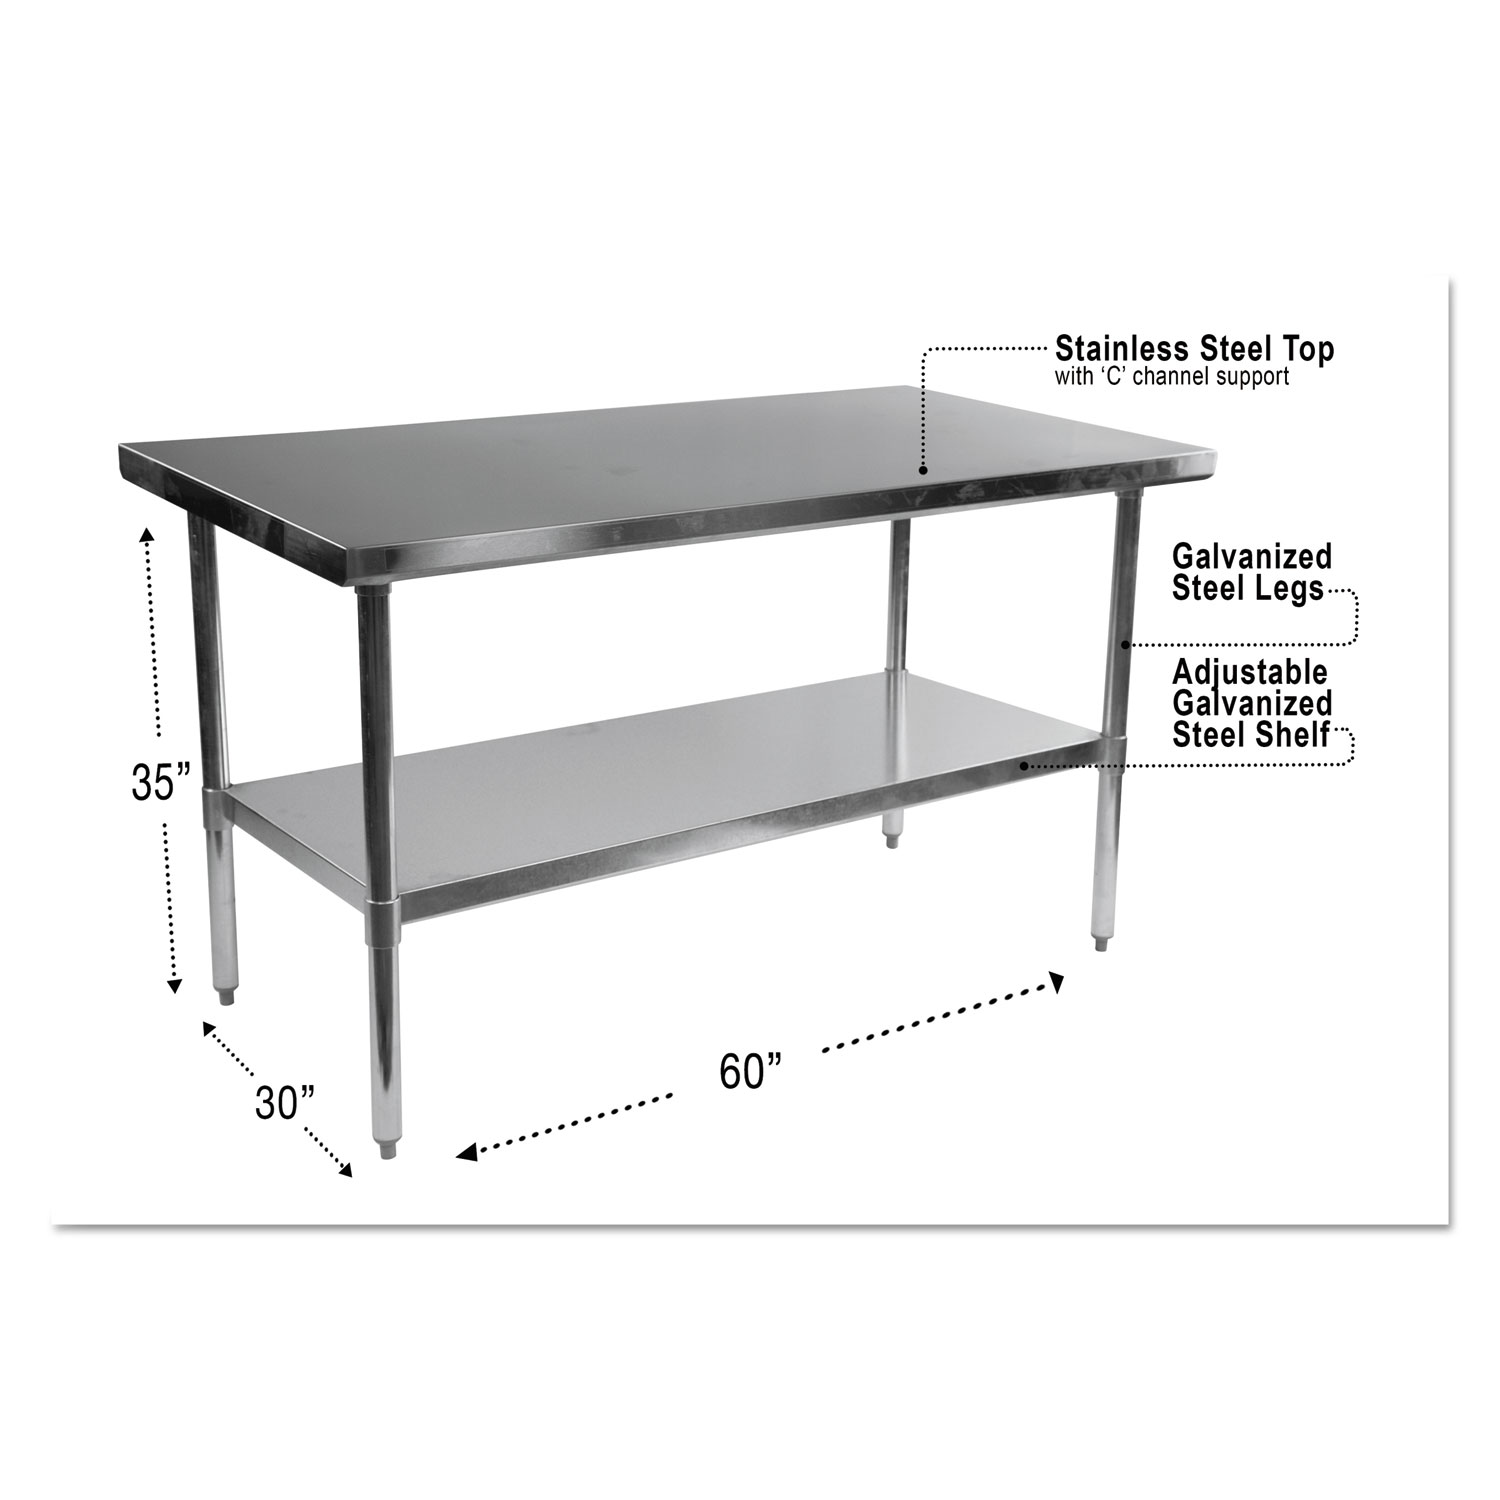  Alera ALEXS6030 NSF Approved Stainless Steel Foodservice Prep Table, 60 x 30 x 35, Silver (ALEXS6030) 